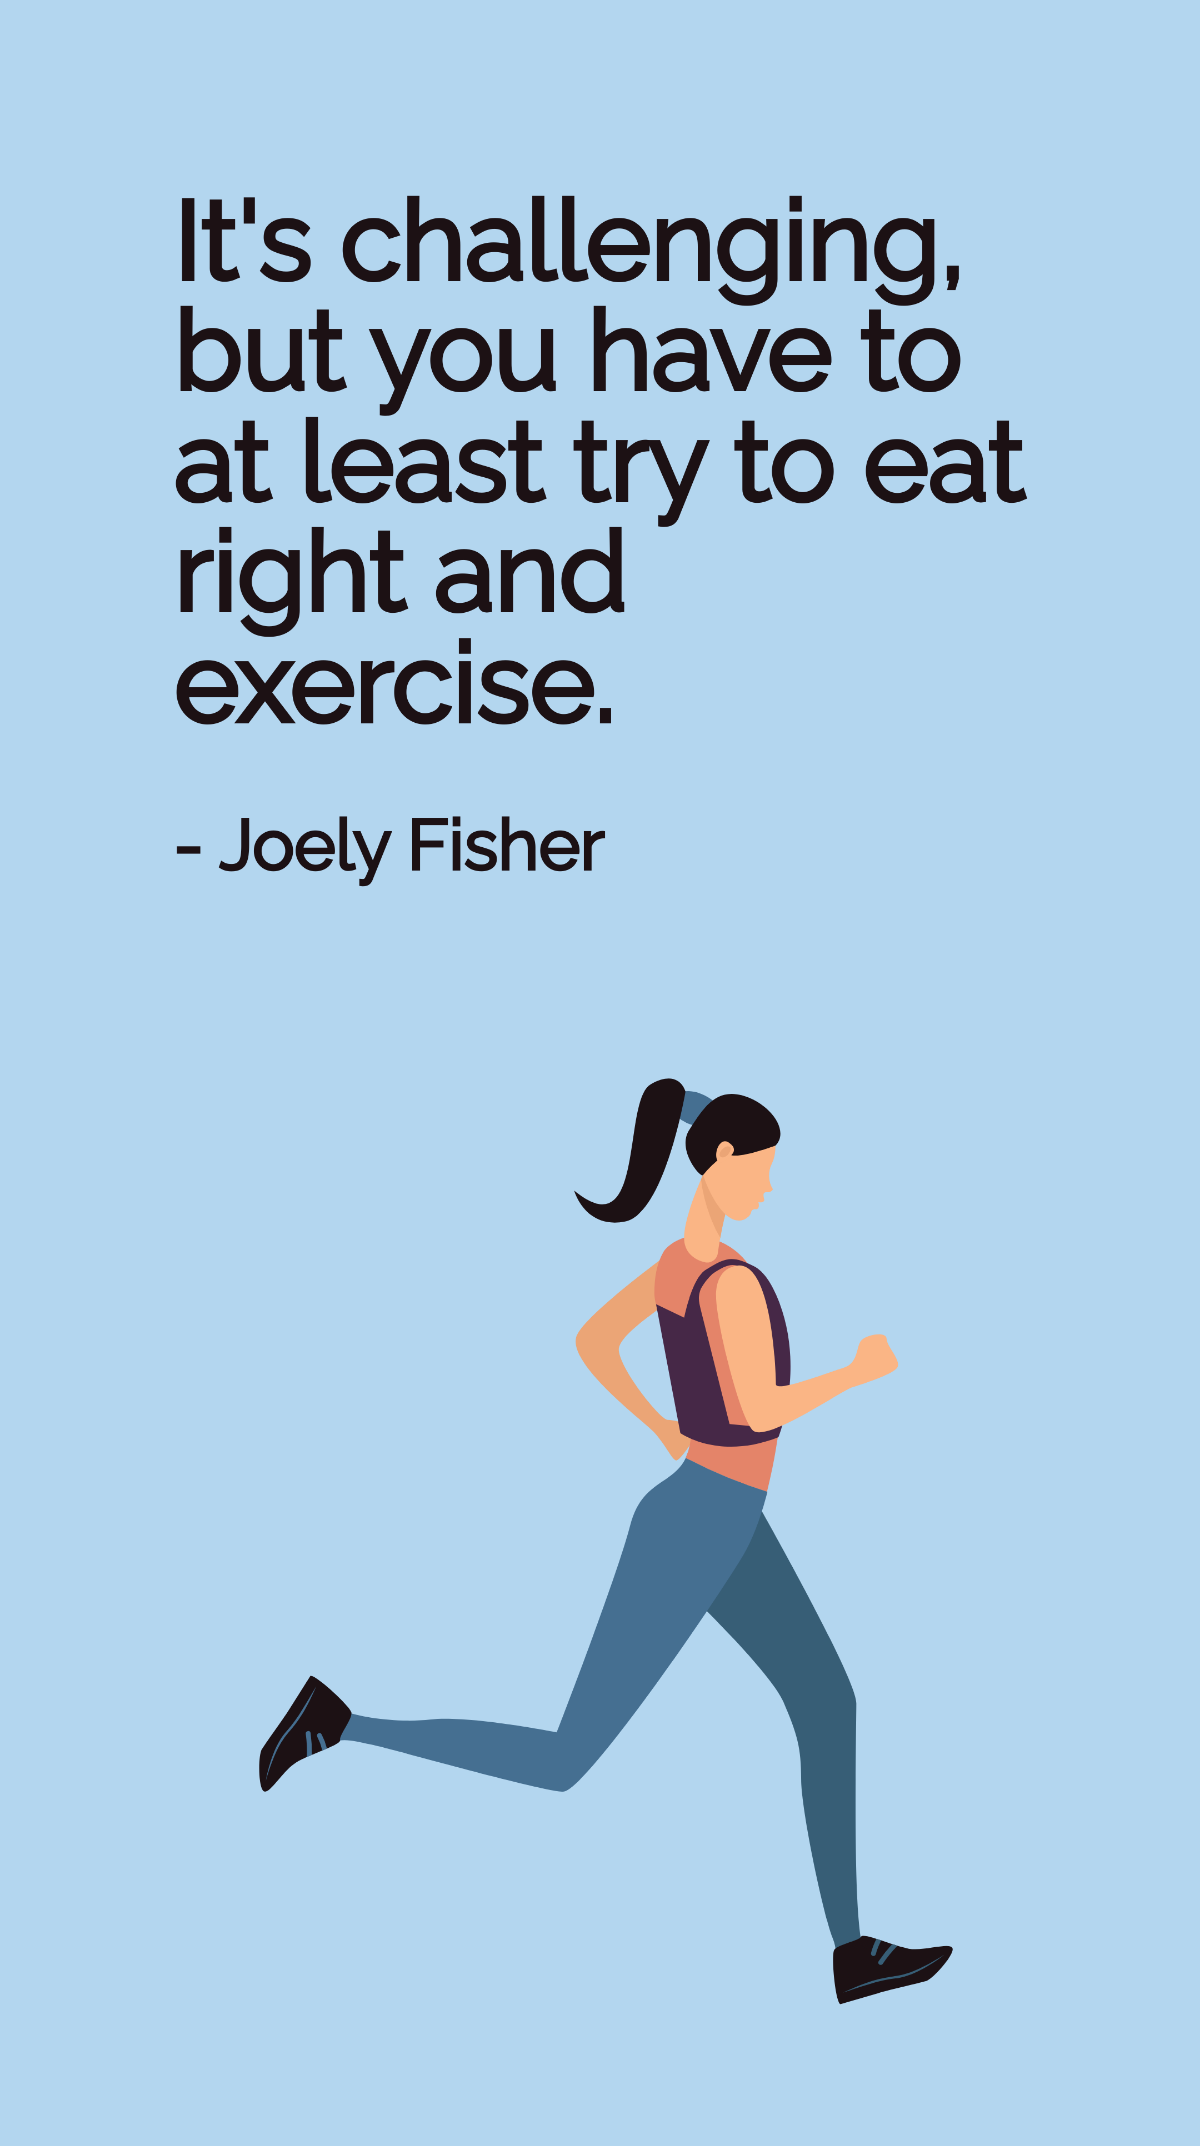 Free Joely Fisher - It's challenging, but you have to at least try to eat right and exercise. Template